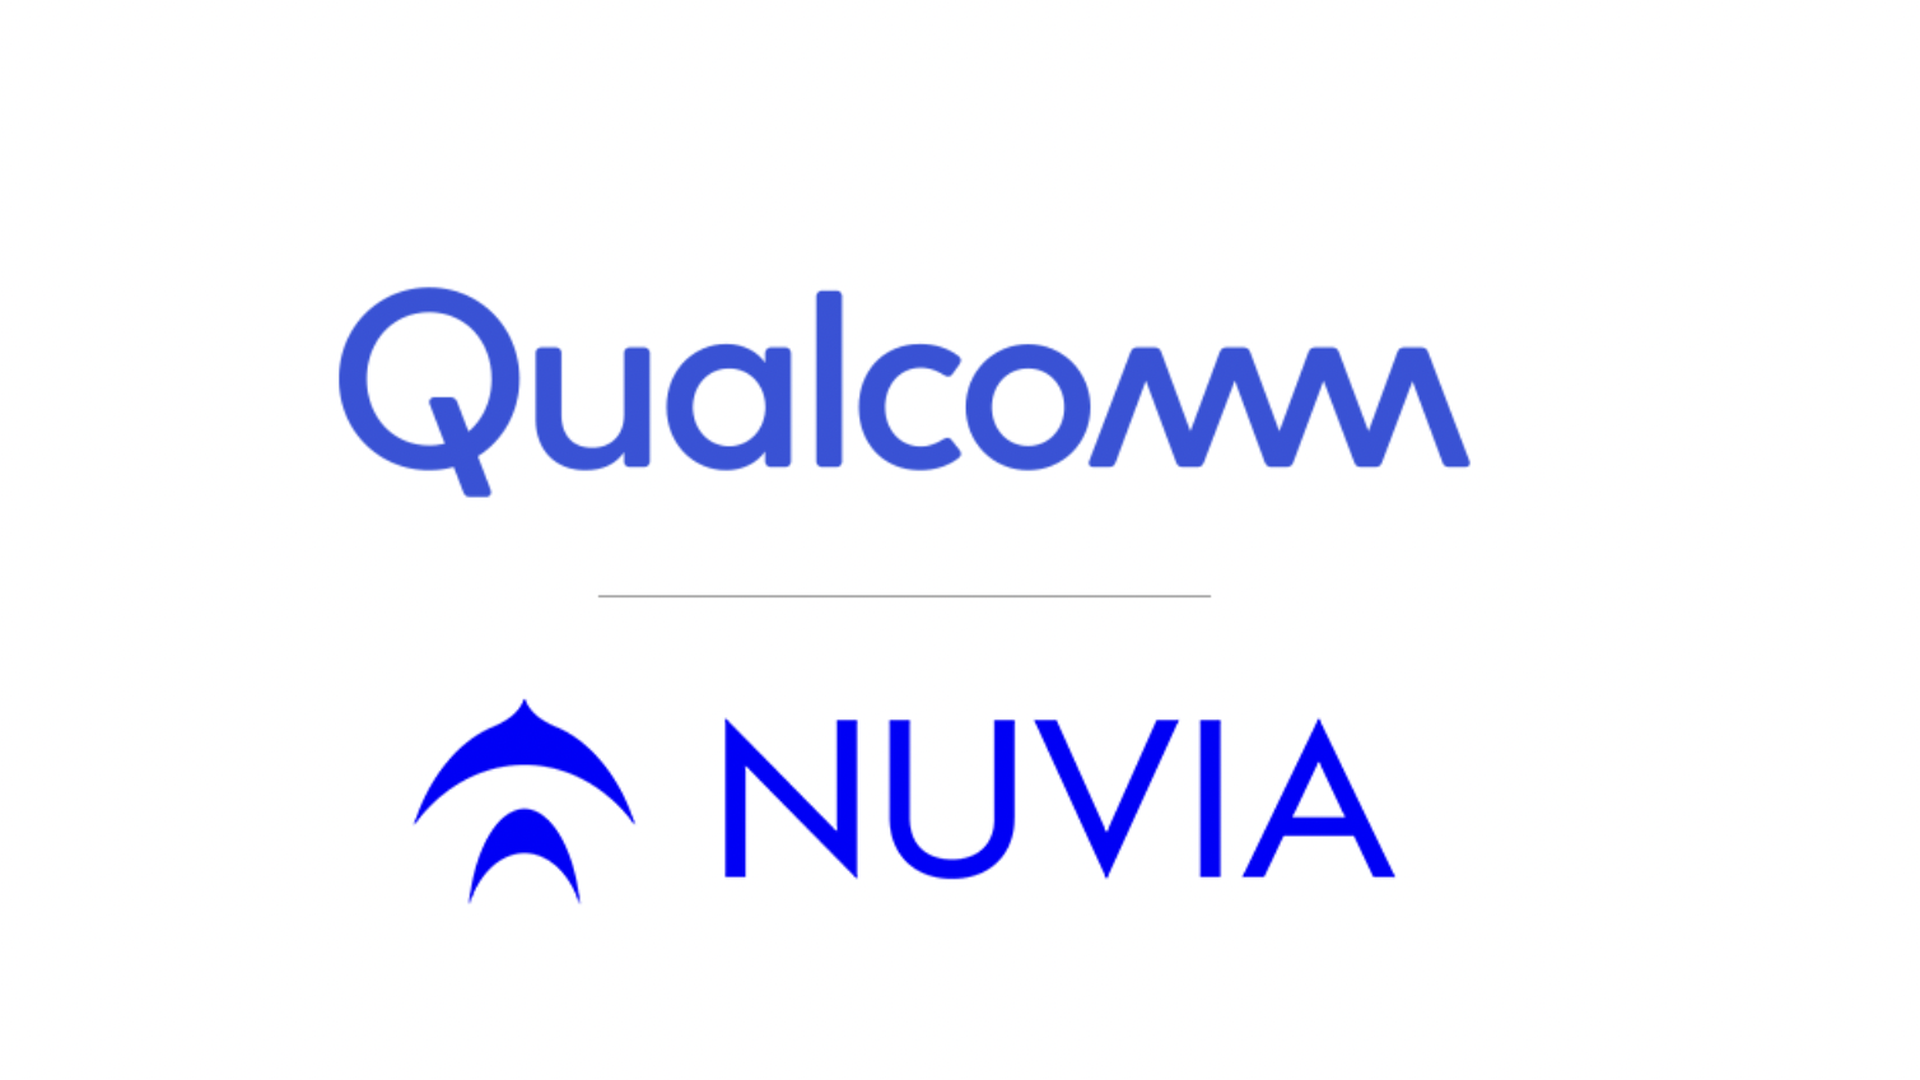 An image of the Qualcomm and Nuvia logos